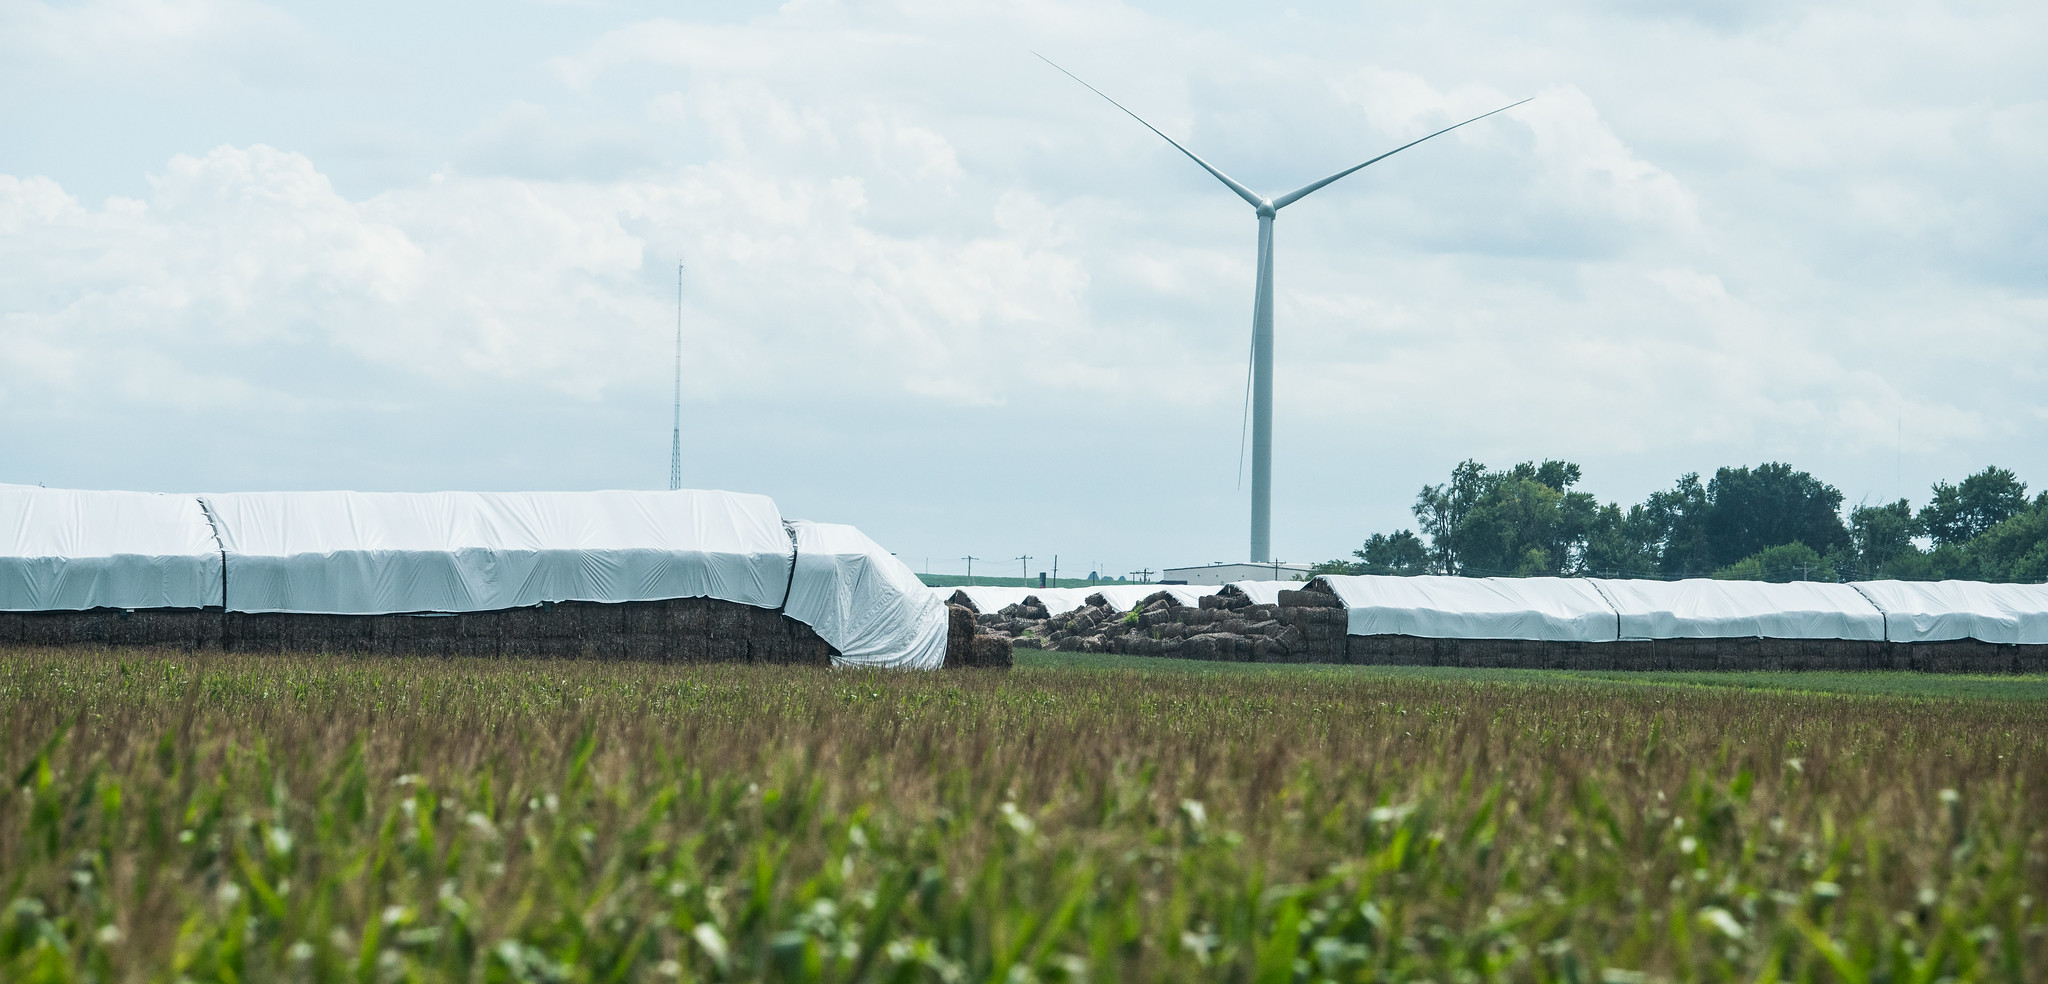 Photograph of bales of maize stover stored at a bioethanol plant is Iowa. The photo shows long piles of rectangular bales covered by white plastic or cloth sitting in a field, with a wind turbine in the background.